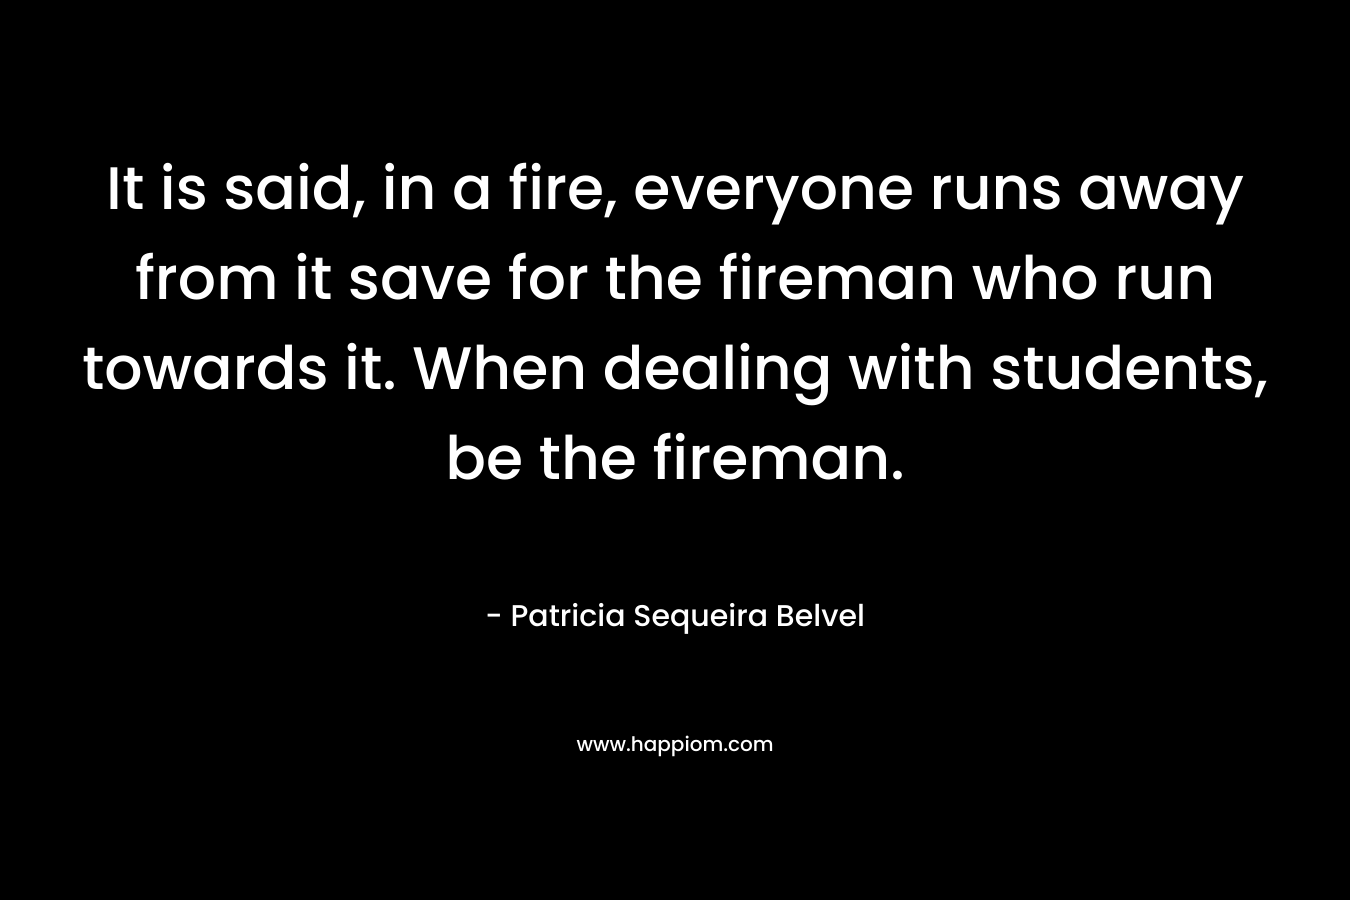 It is said, in a fire, everyone runs away from it save for the fireman who run towards it. When dealing with students, be the fireman. – Patricia Sequeira Belvel